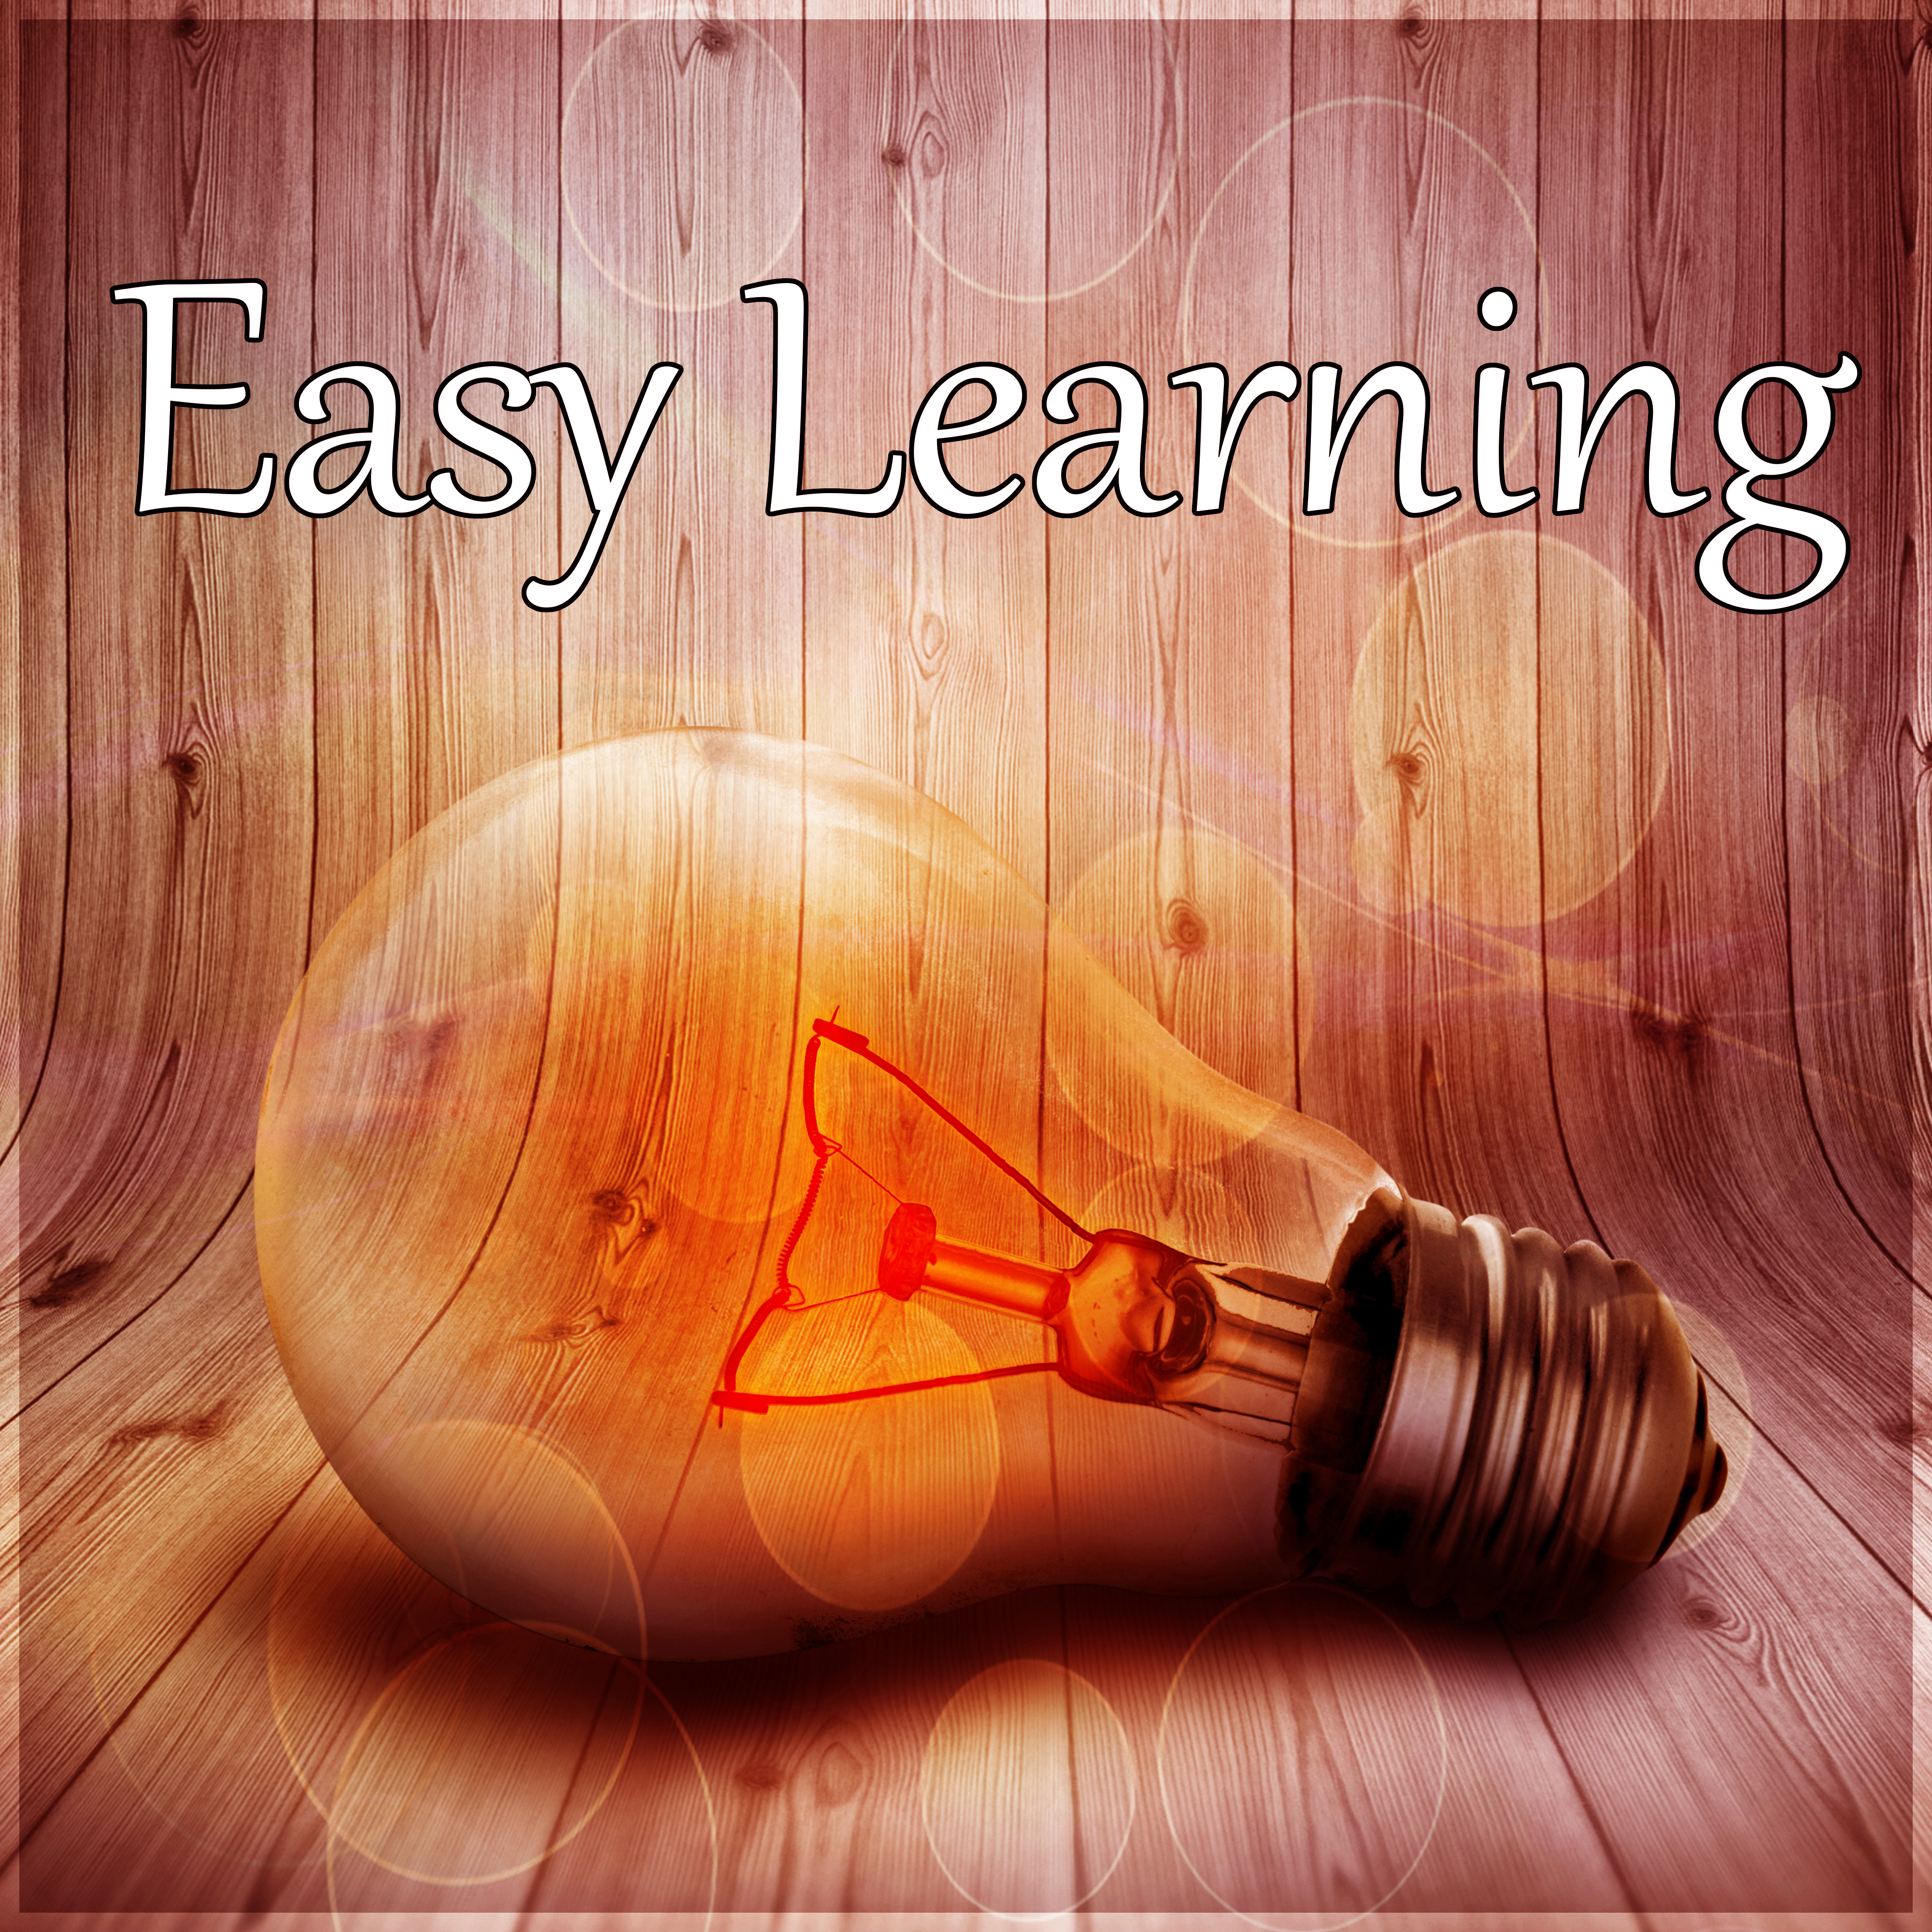 Easy Learning  Calm Music for Reading  Faster Learning, Calm Down and Focus on the Task, Improve Brain Power, Nature Sounds for Relaxation, Increase Memory with New Age Music